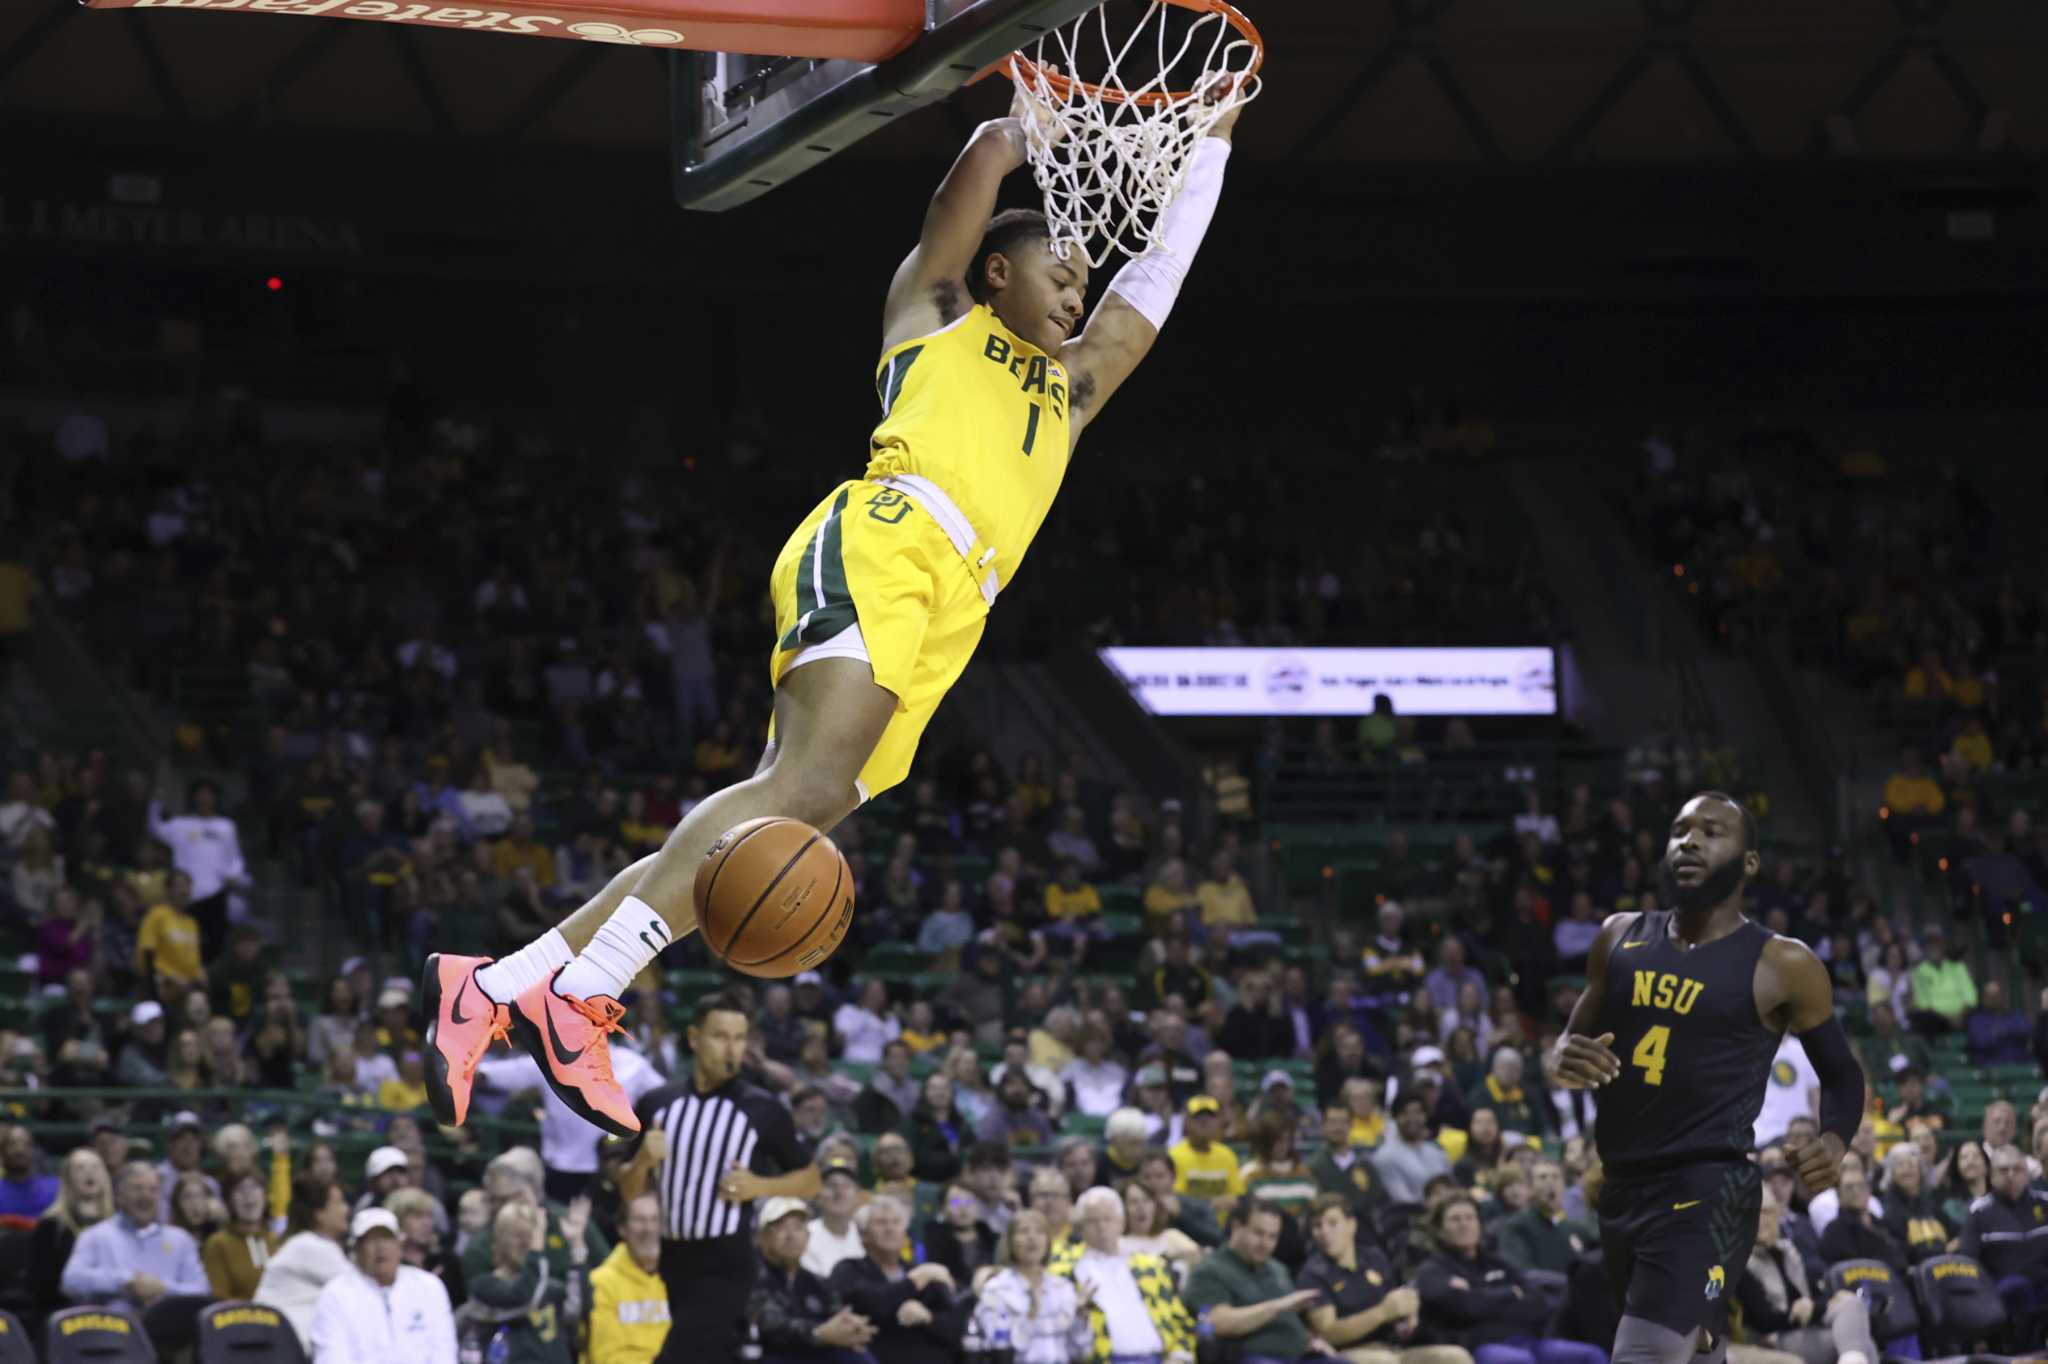 Freshman Keyonte George leads No. 5 Baylor over Norfolk State